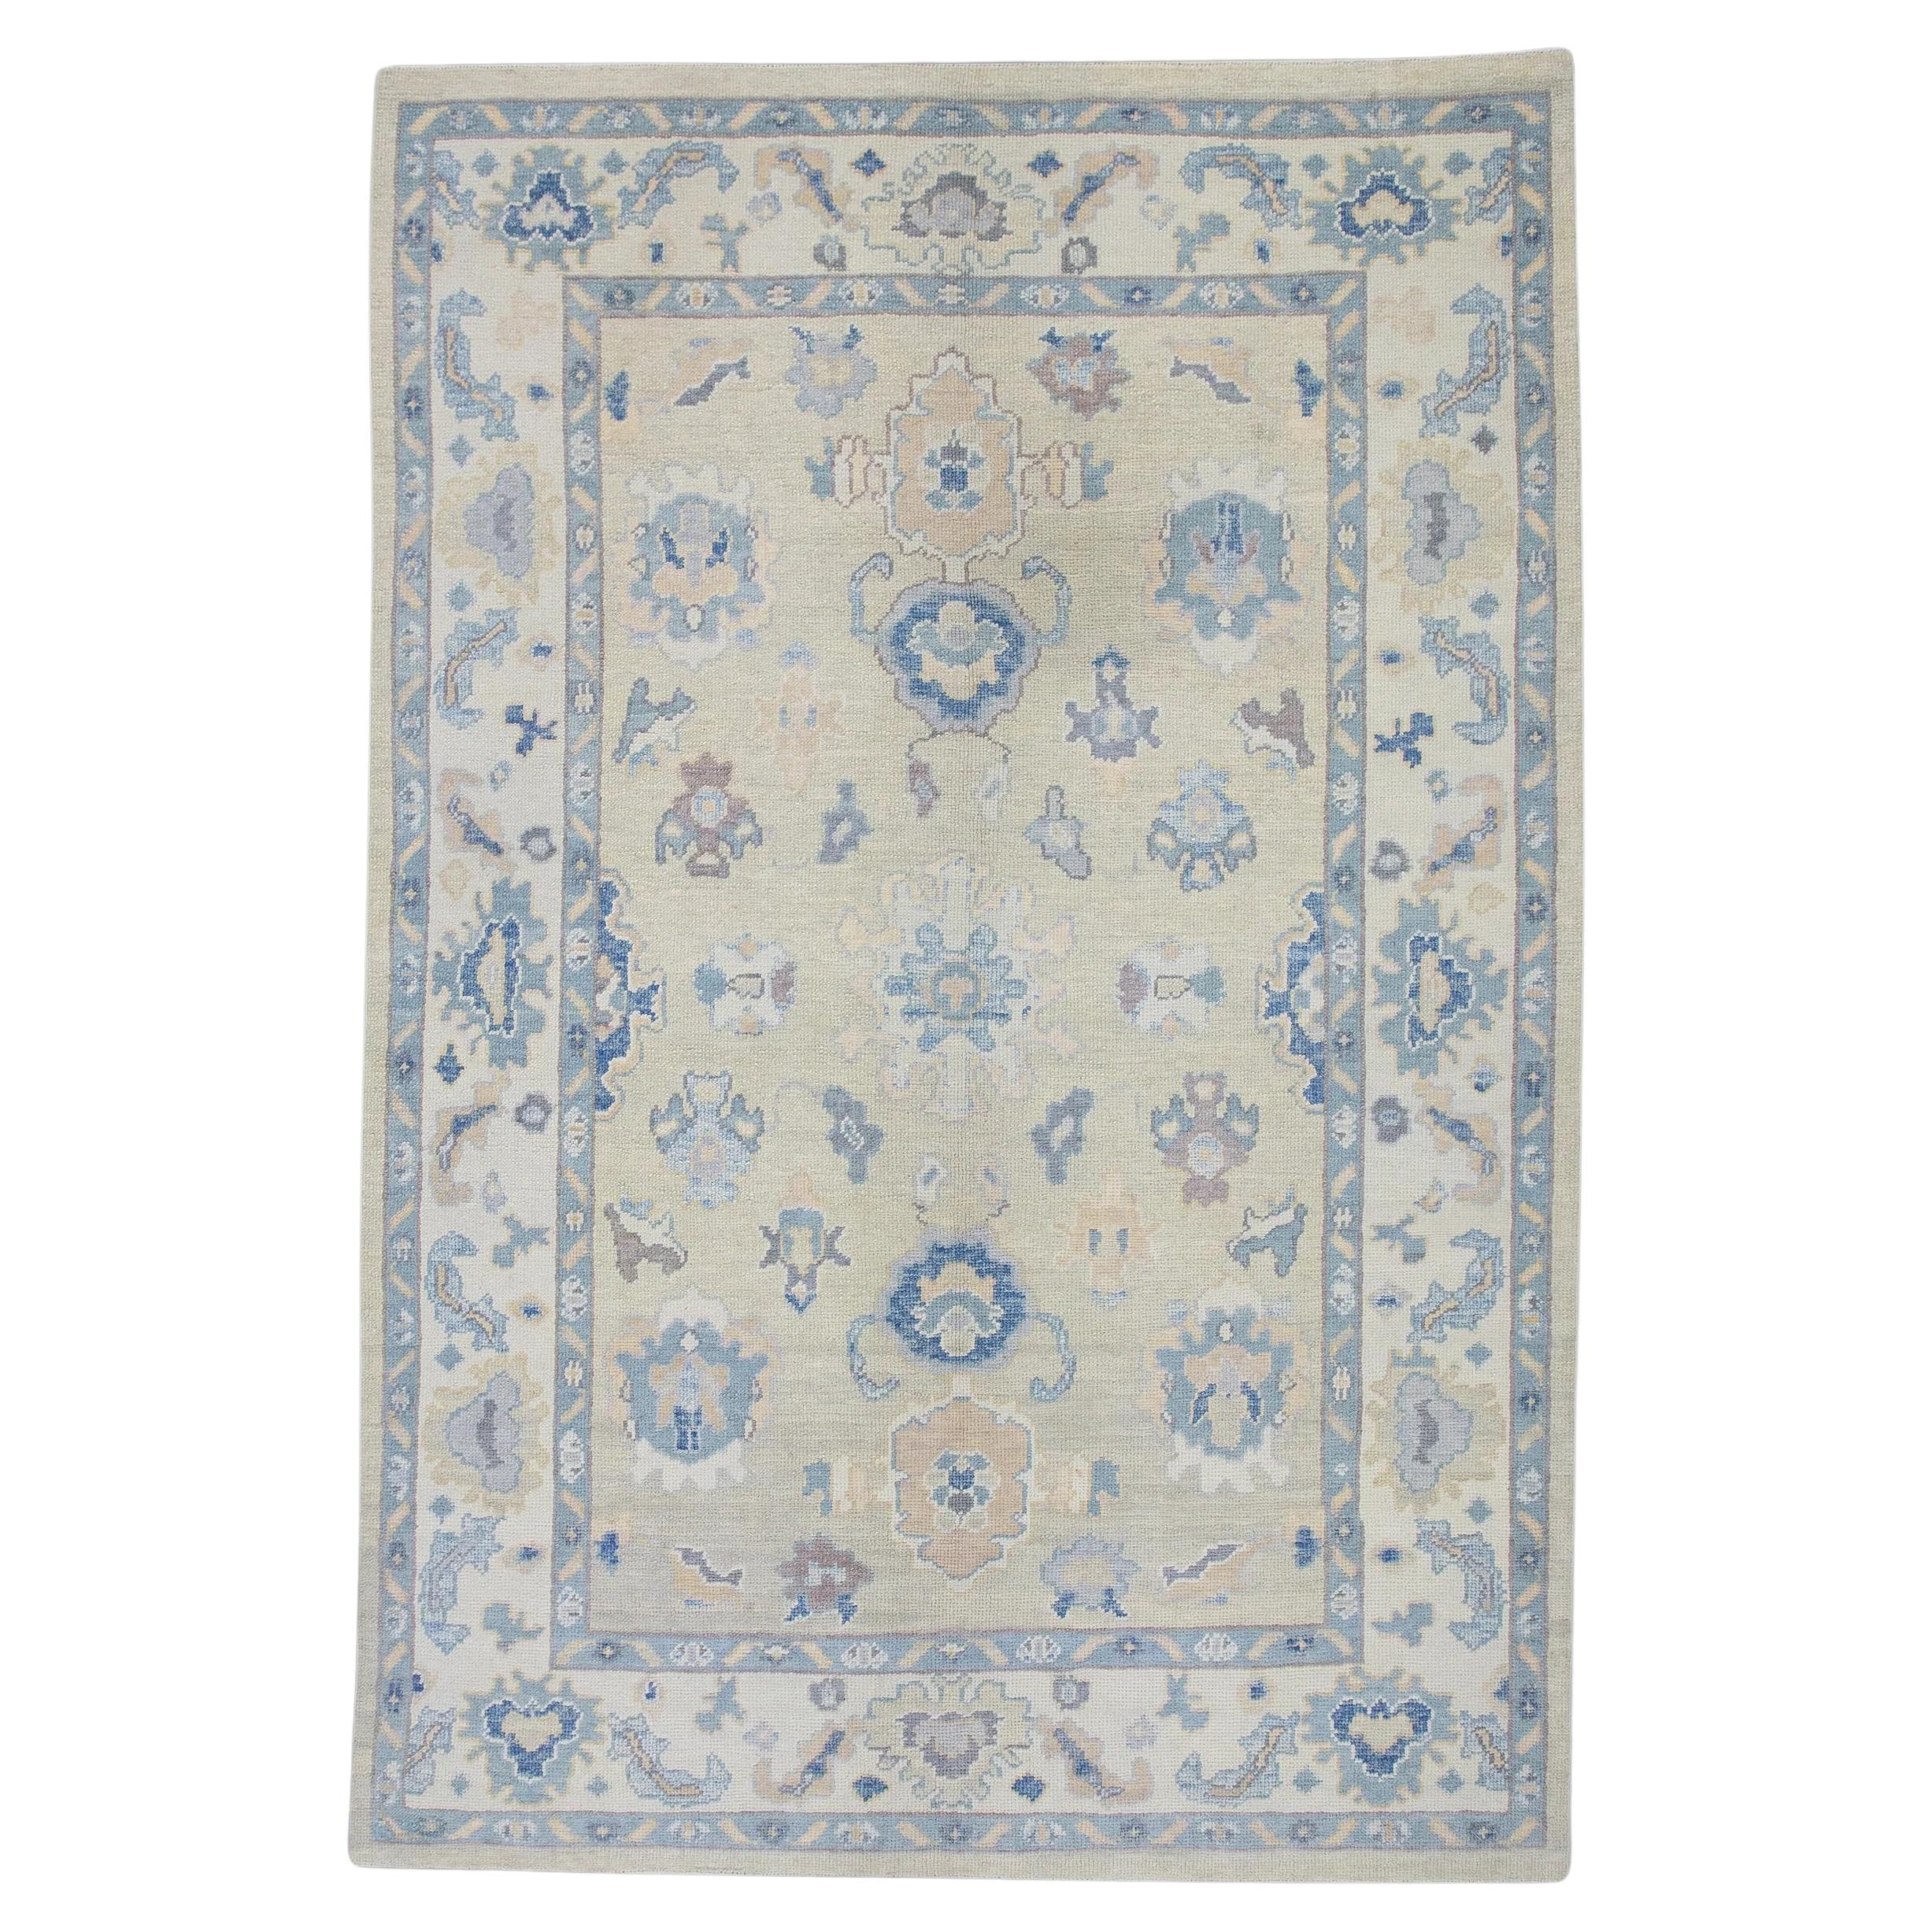 Cream Handwoven Wool Turkish Oushak Rug in Blue Floral Design 6' x 8'10" For Sale